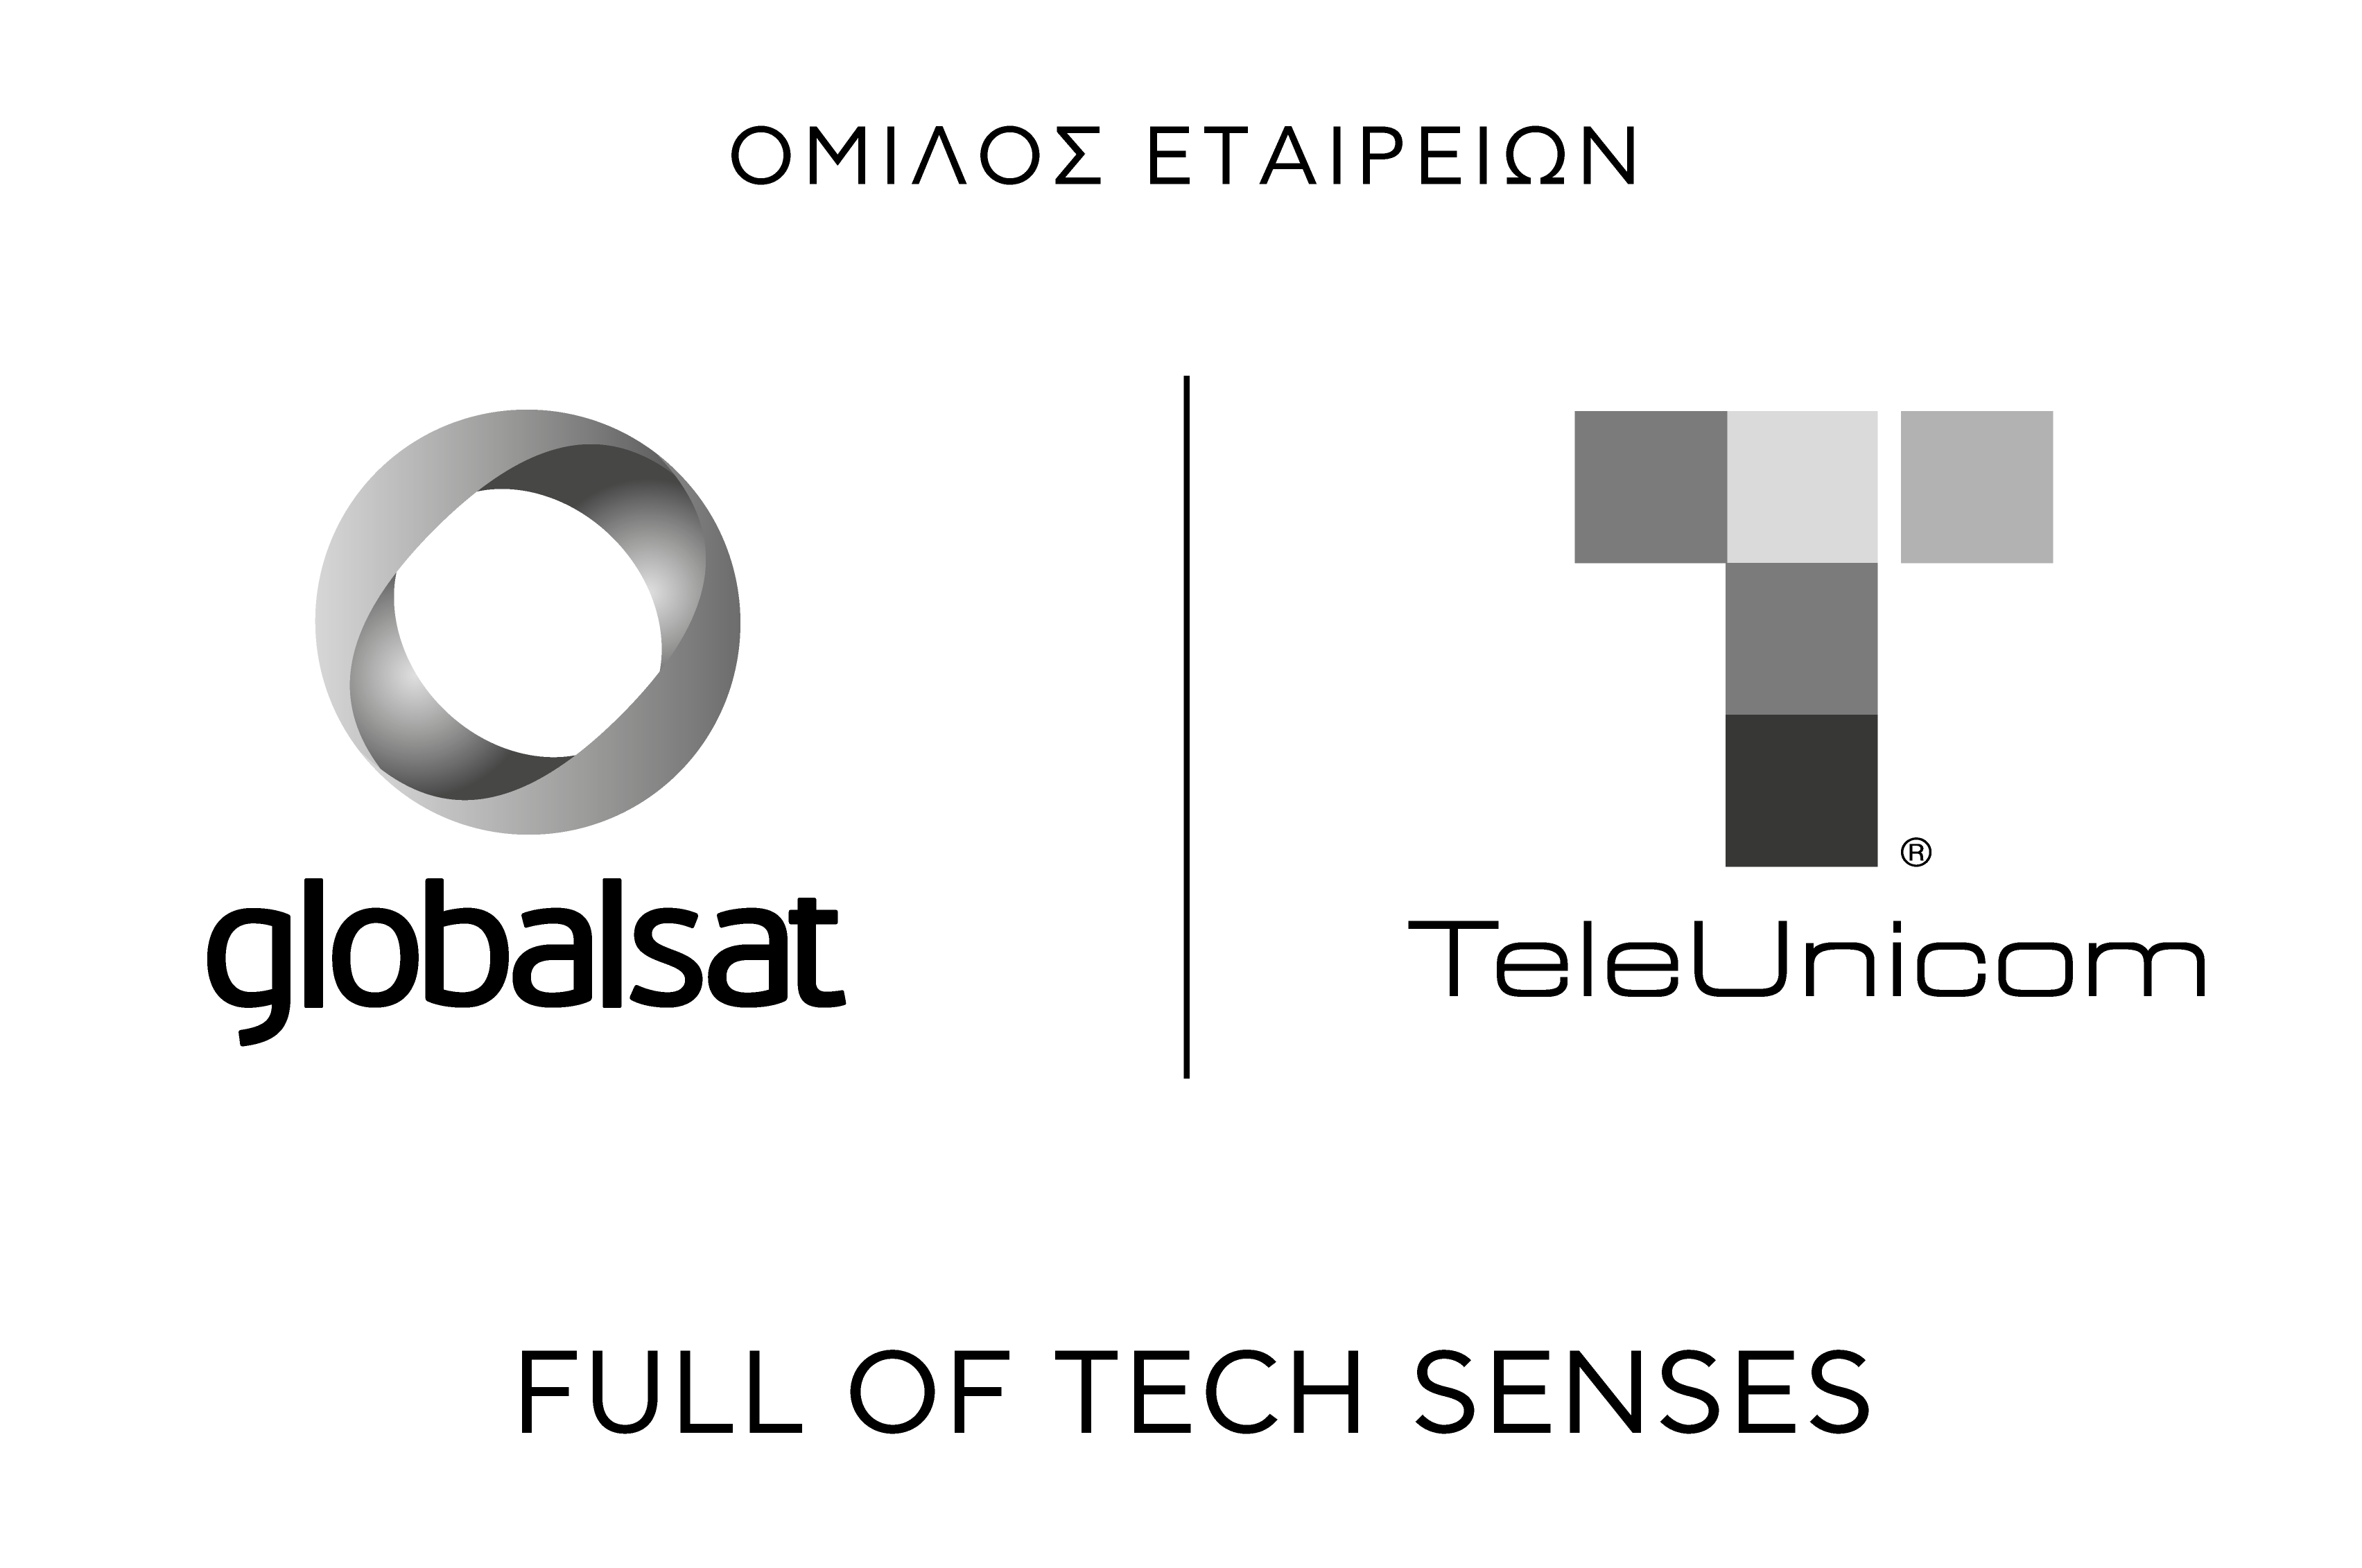 knowcrunch-trained-globalsat-logo-greyscale.png